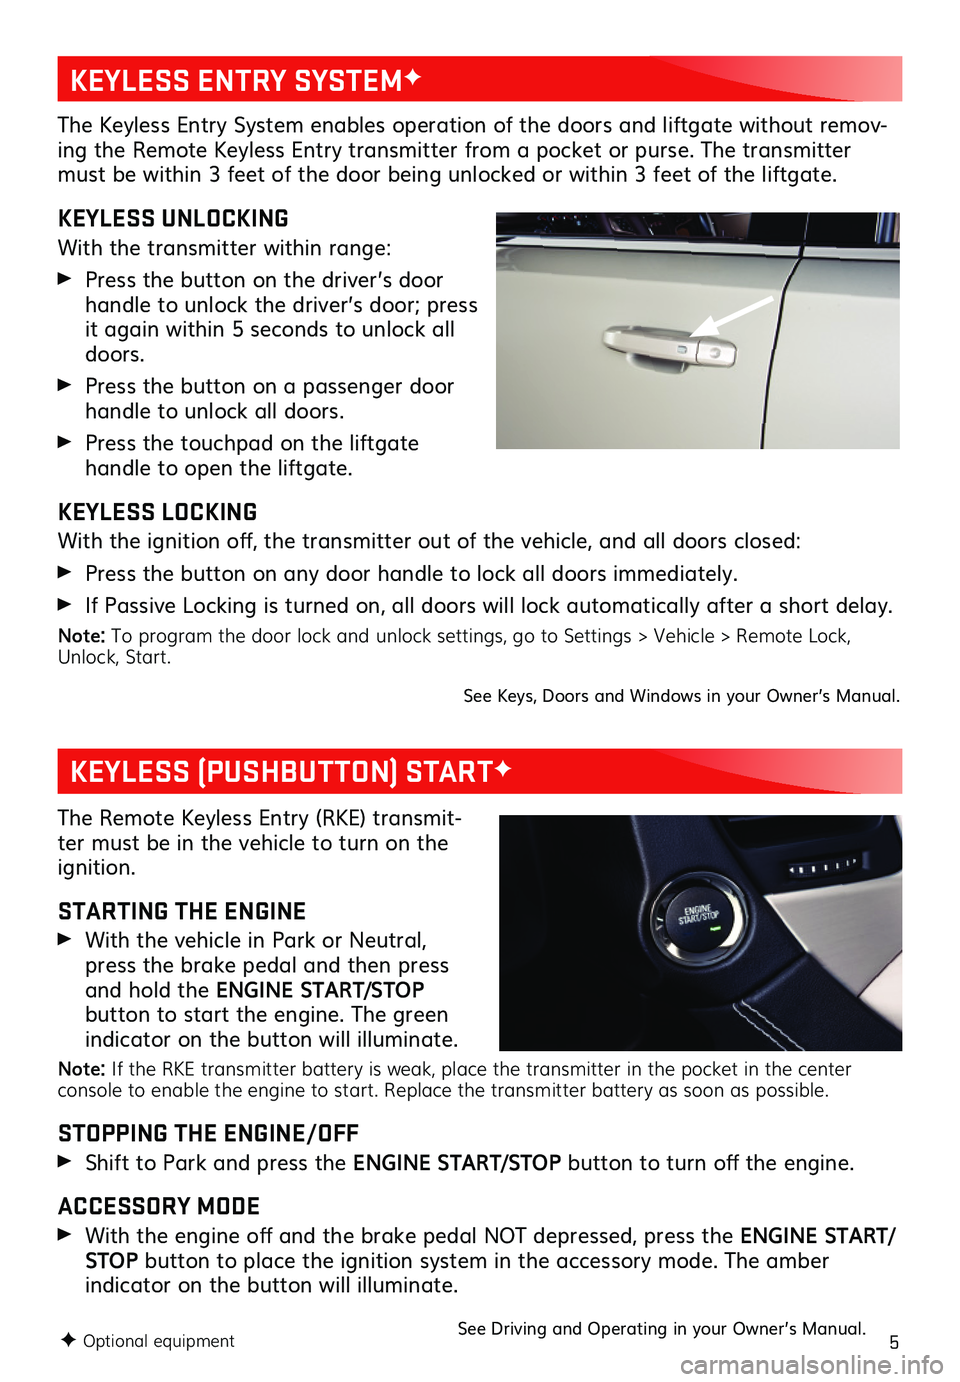 GMC YUKON 2020  Get To Know Guide 5
The Keyless Entry System enables operation of the doors and liftgate without remov-ing the Remote Keyless Entry transmitter from a pocket or purse. The transmitter must be within 3 feet of the door 